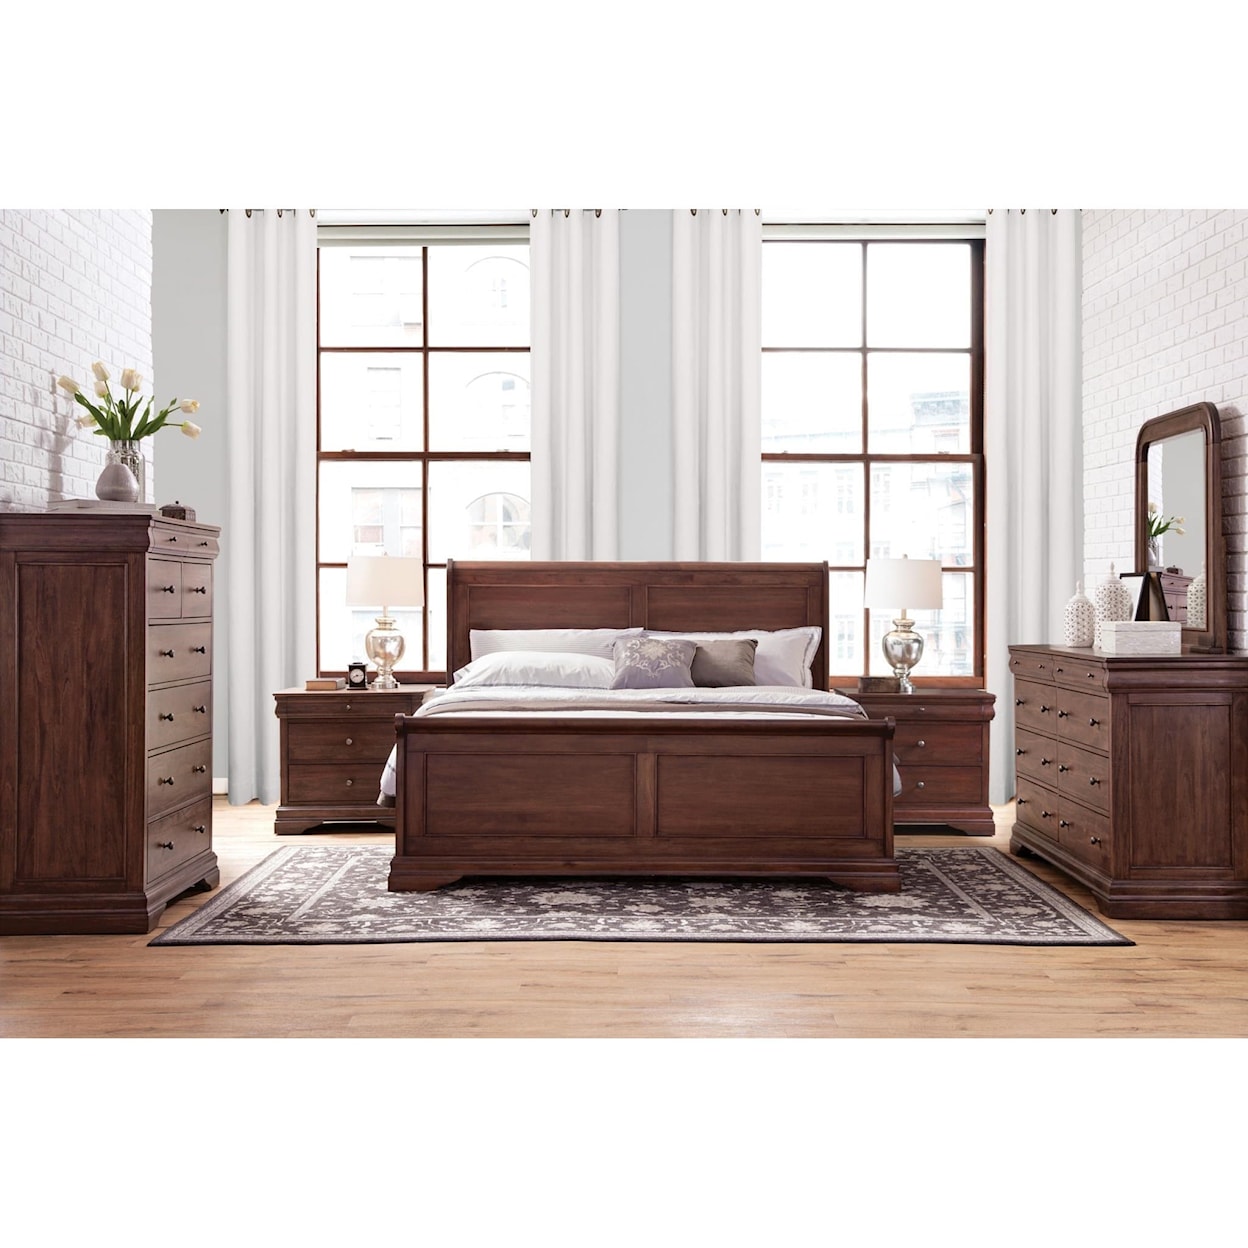 Napa Furniture Design French Classic Queen Bedroom Group